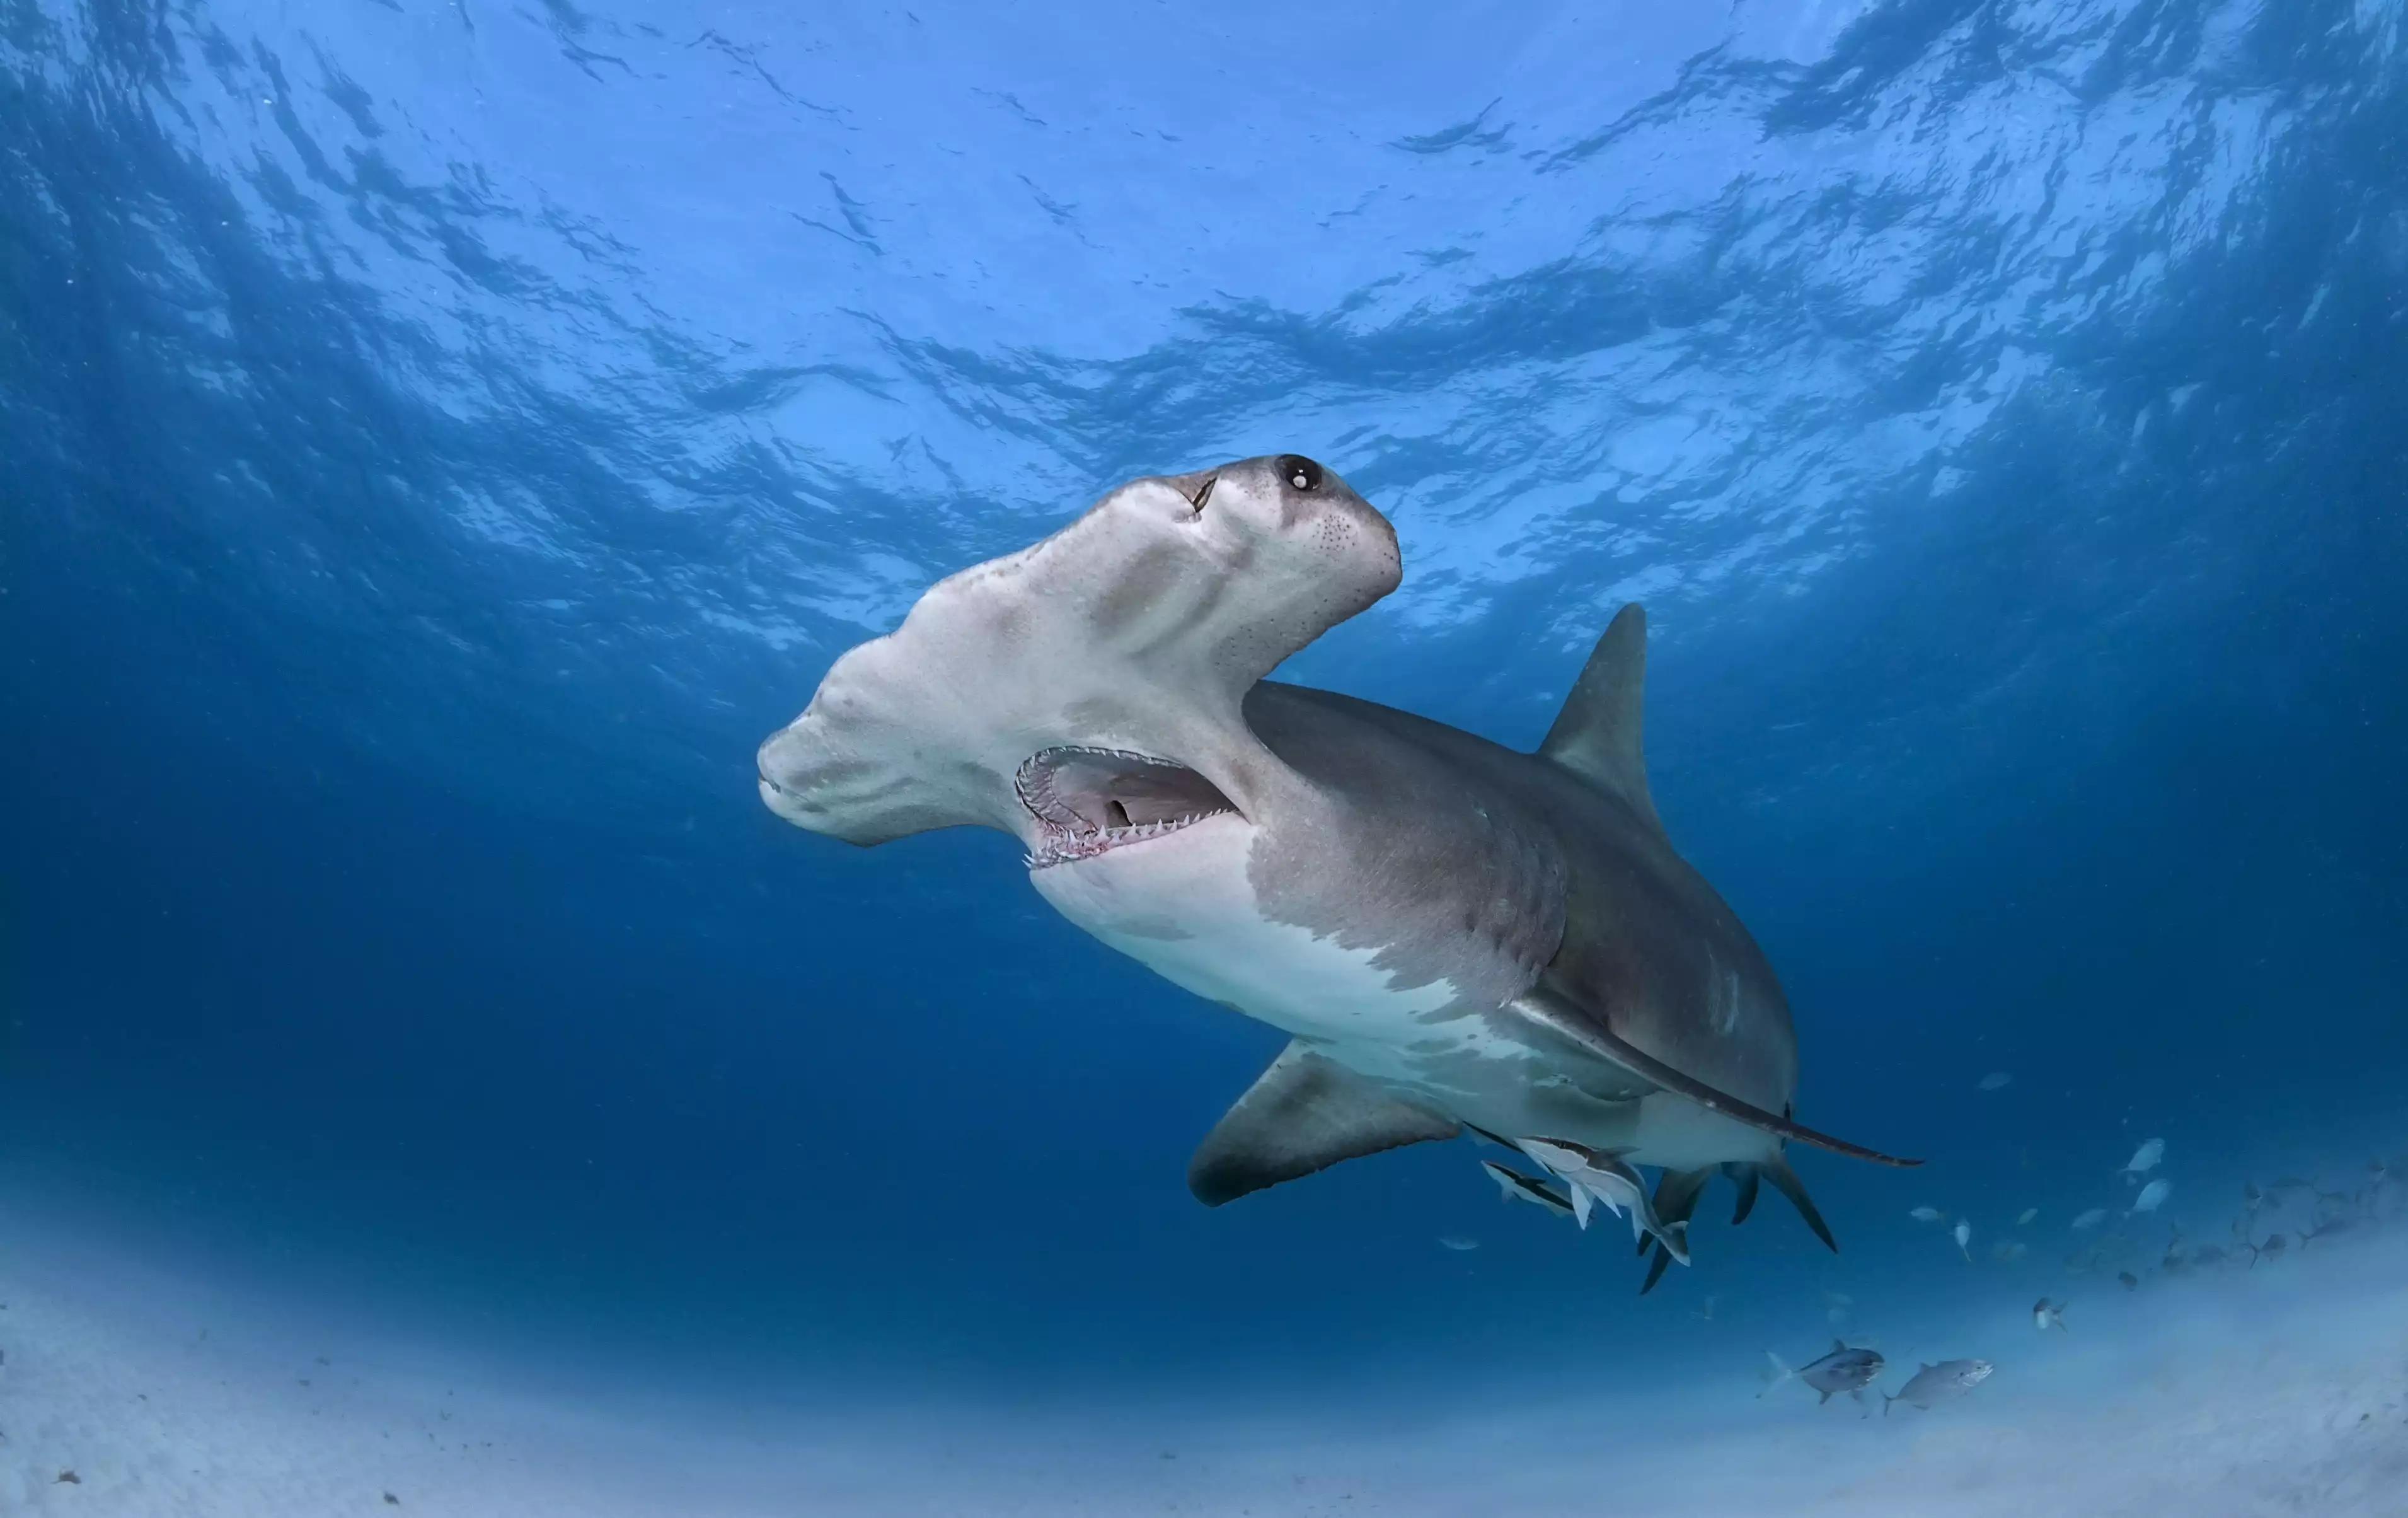 Gray great hammerhead shark with jaws open swimming in the ocean